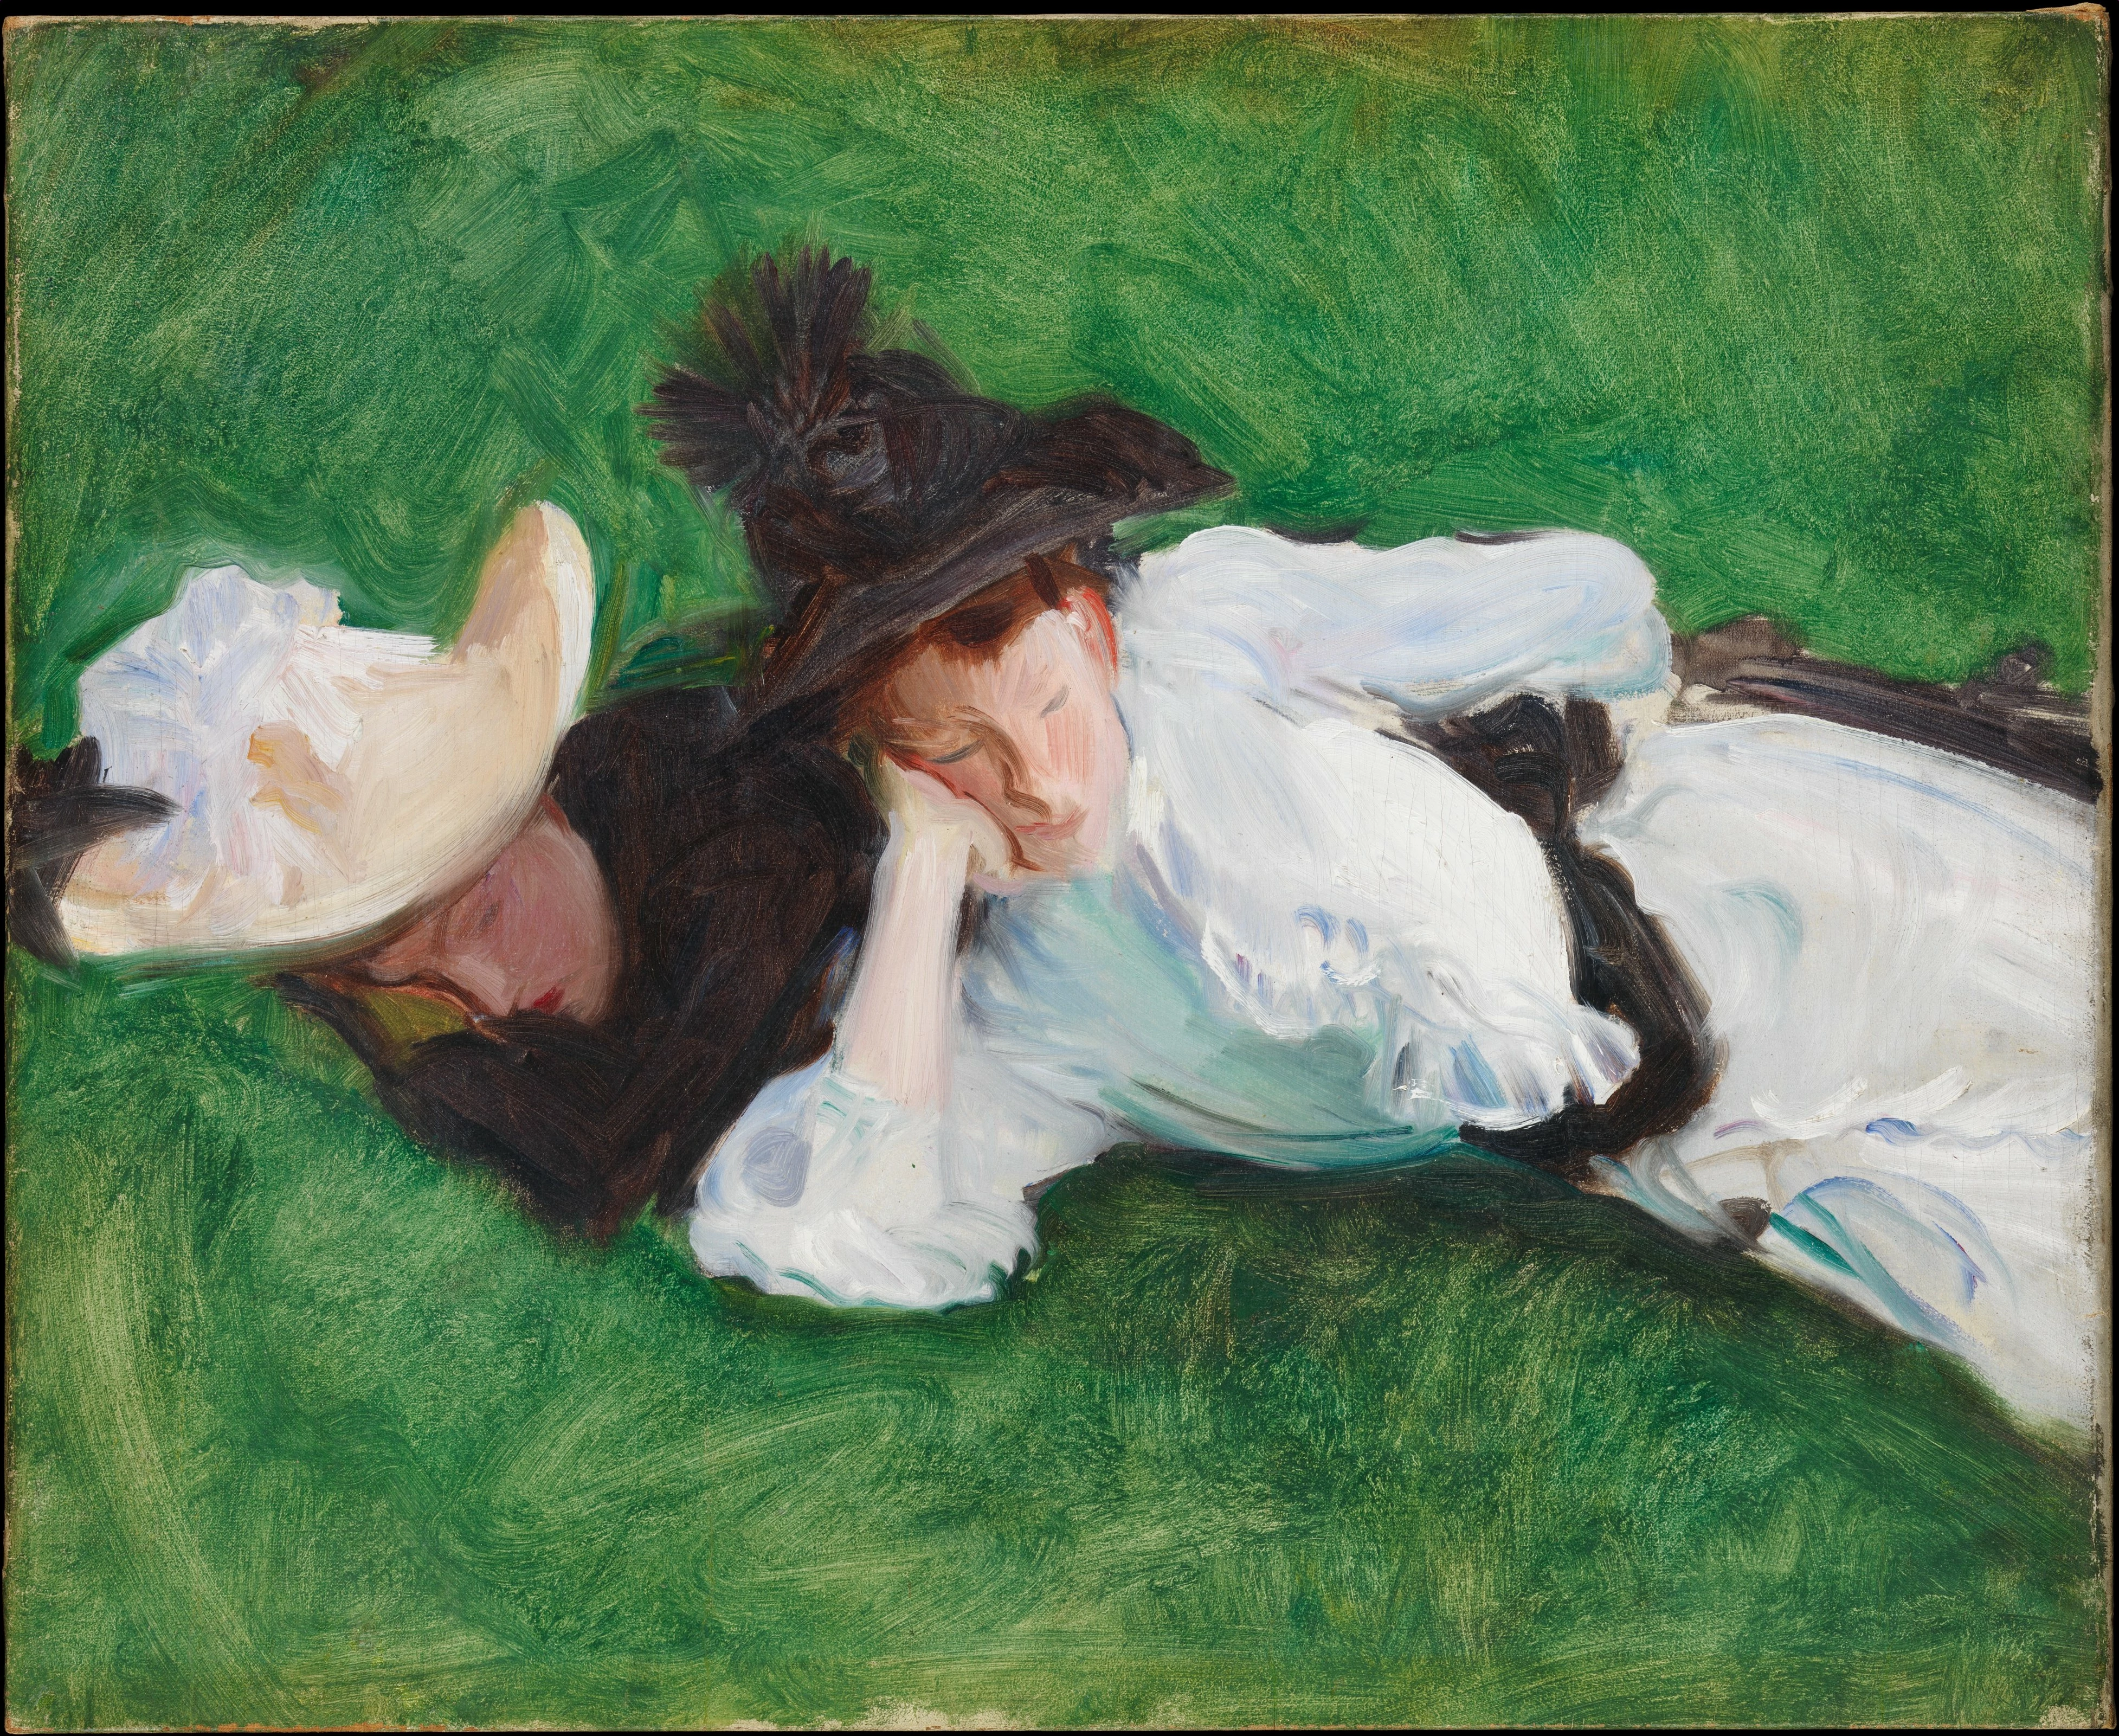 Two Girls on a Lawn, John Singer Sargent